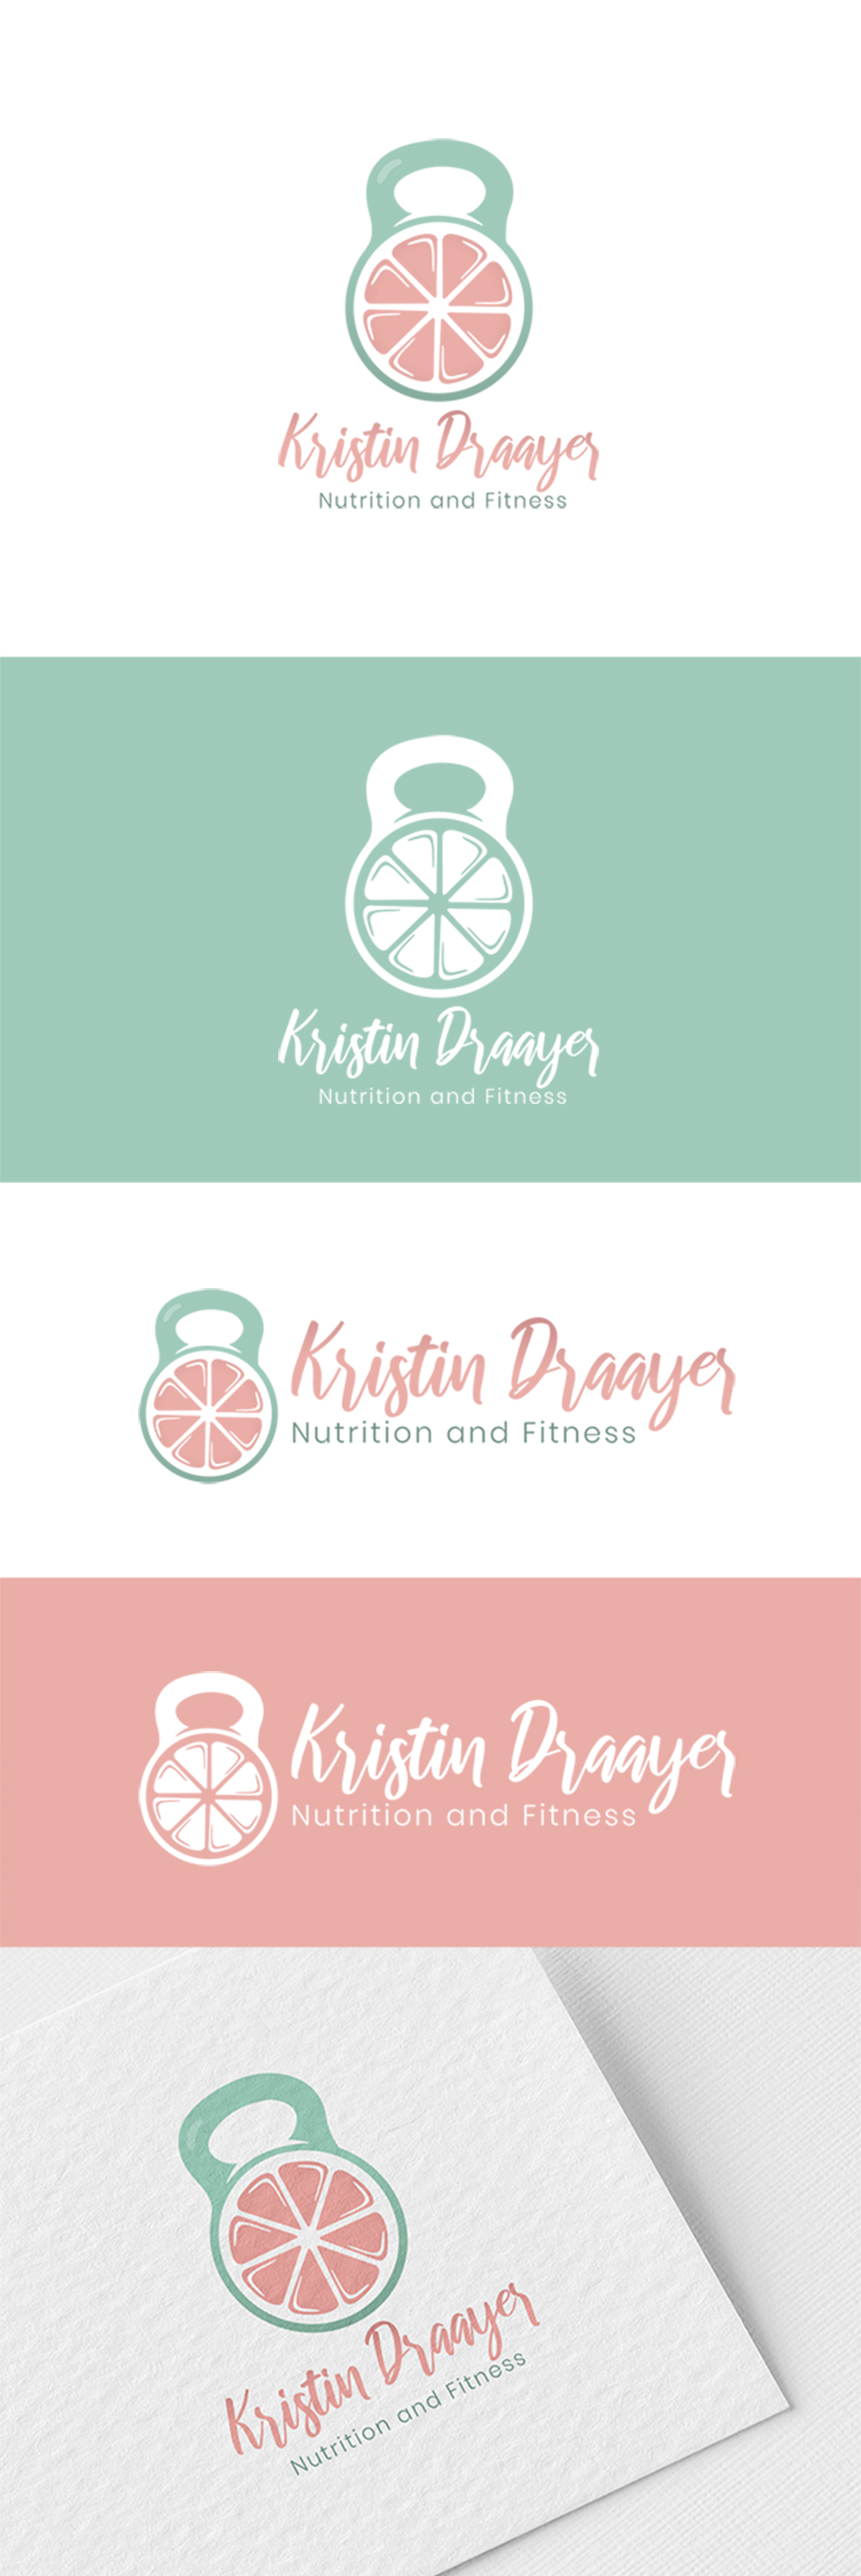 Check out kedraayer's new logo design from 99designs -   8 diet Logo design ideas